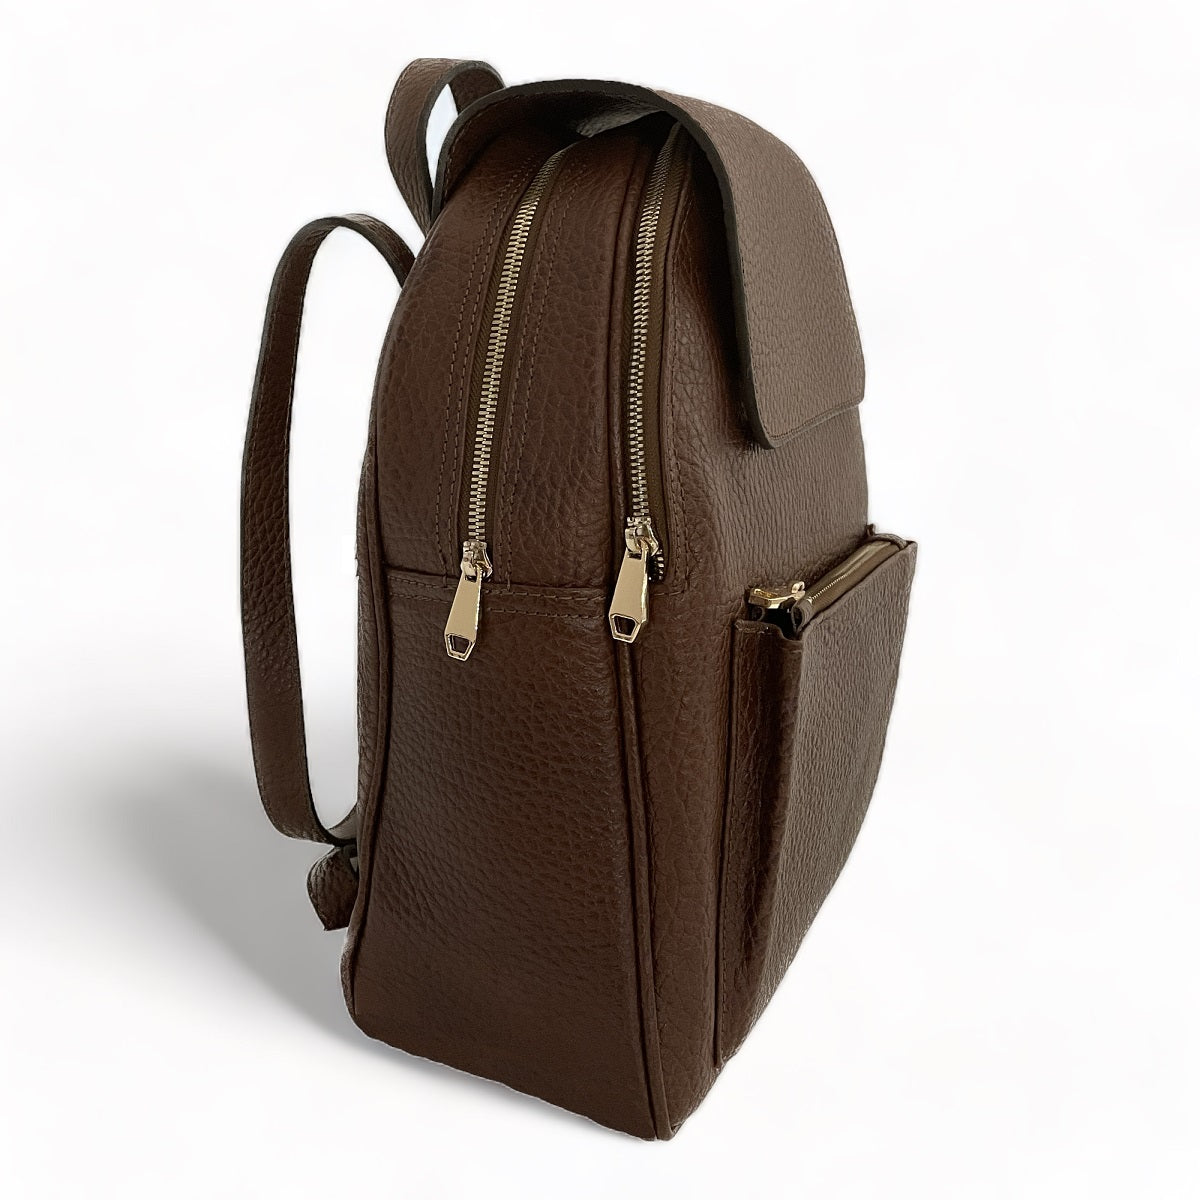 LeatherLuxe - Brown Leather Women's Backpack 